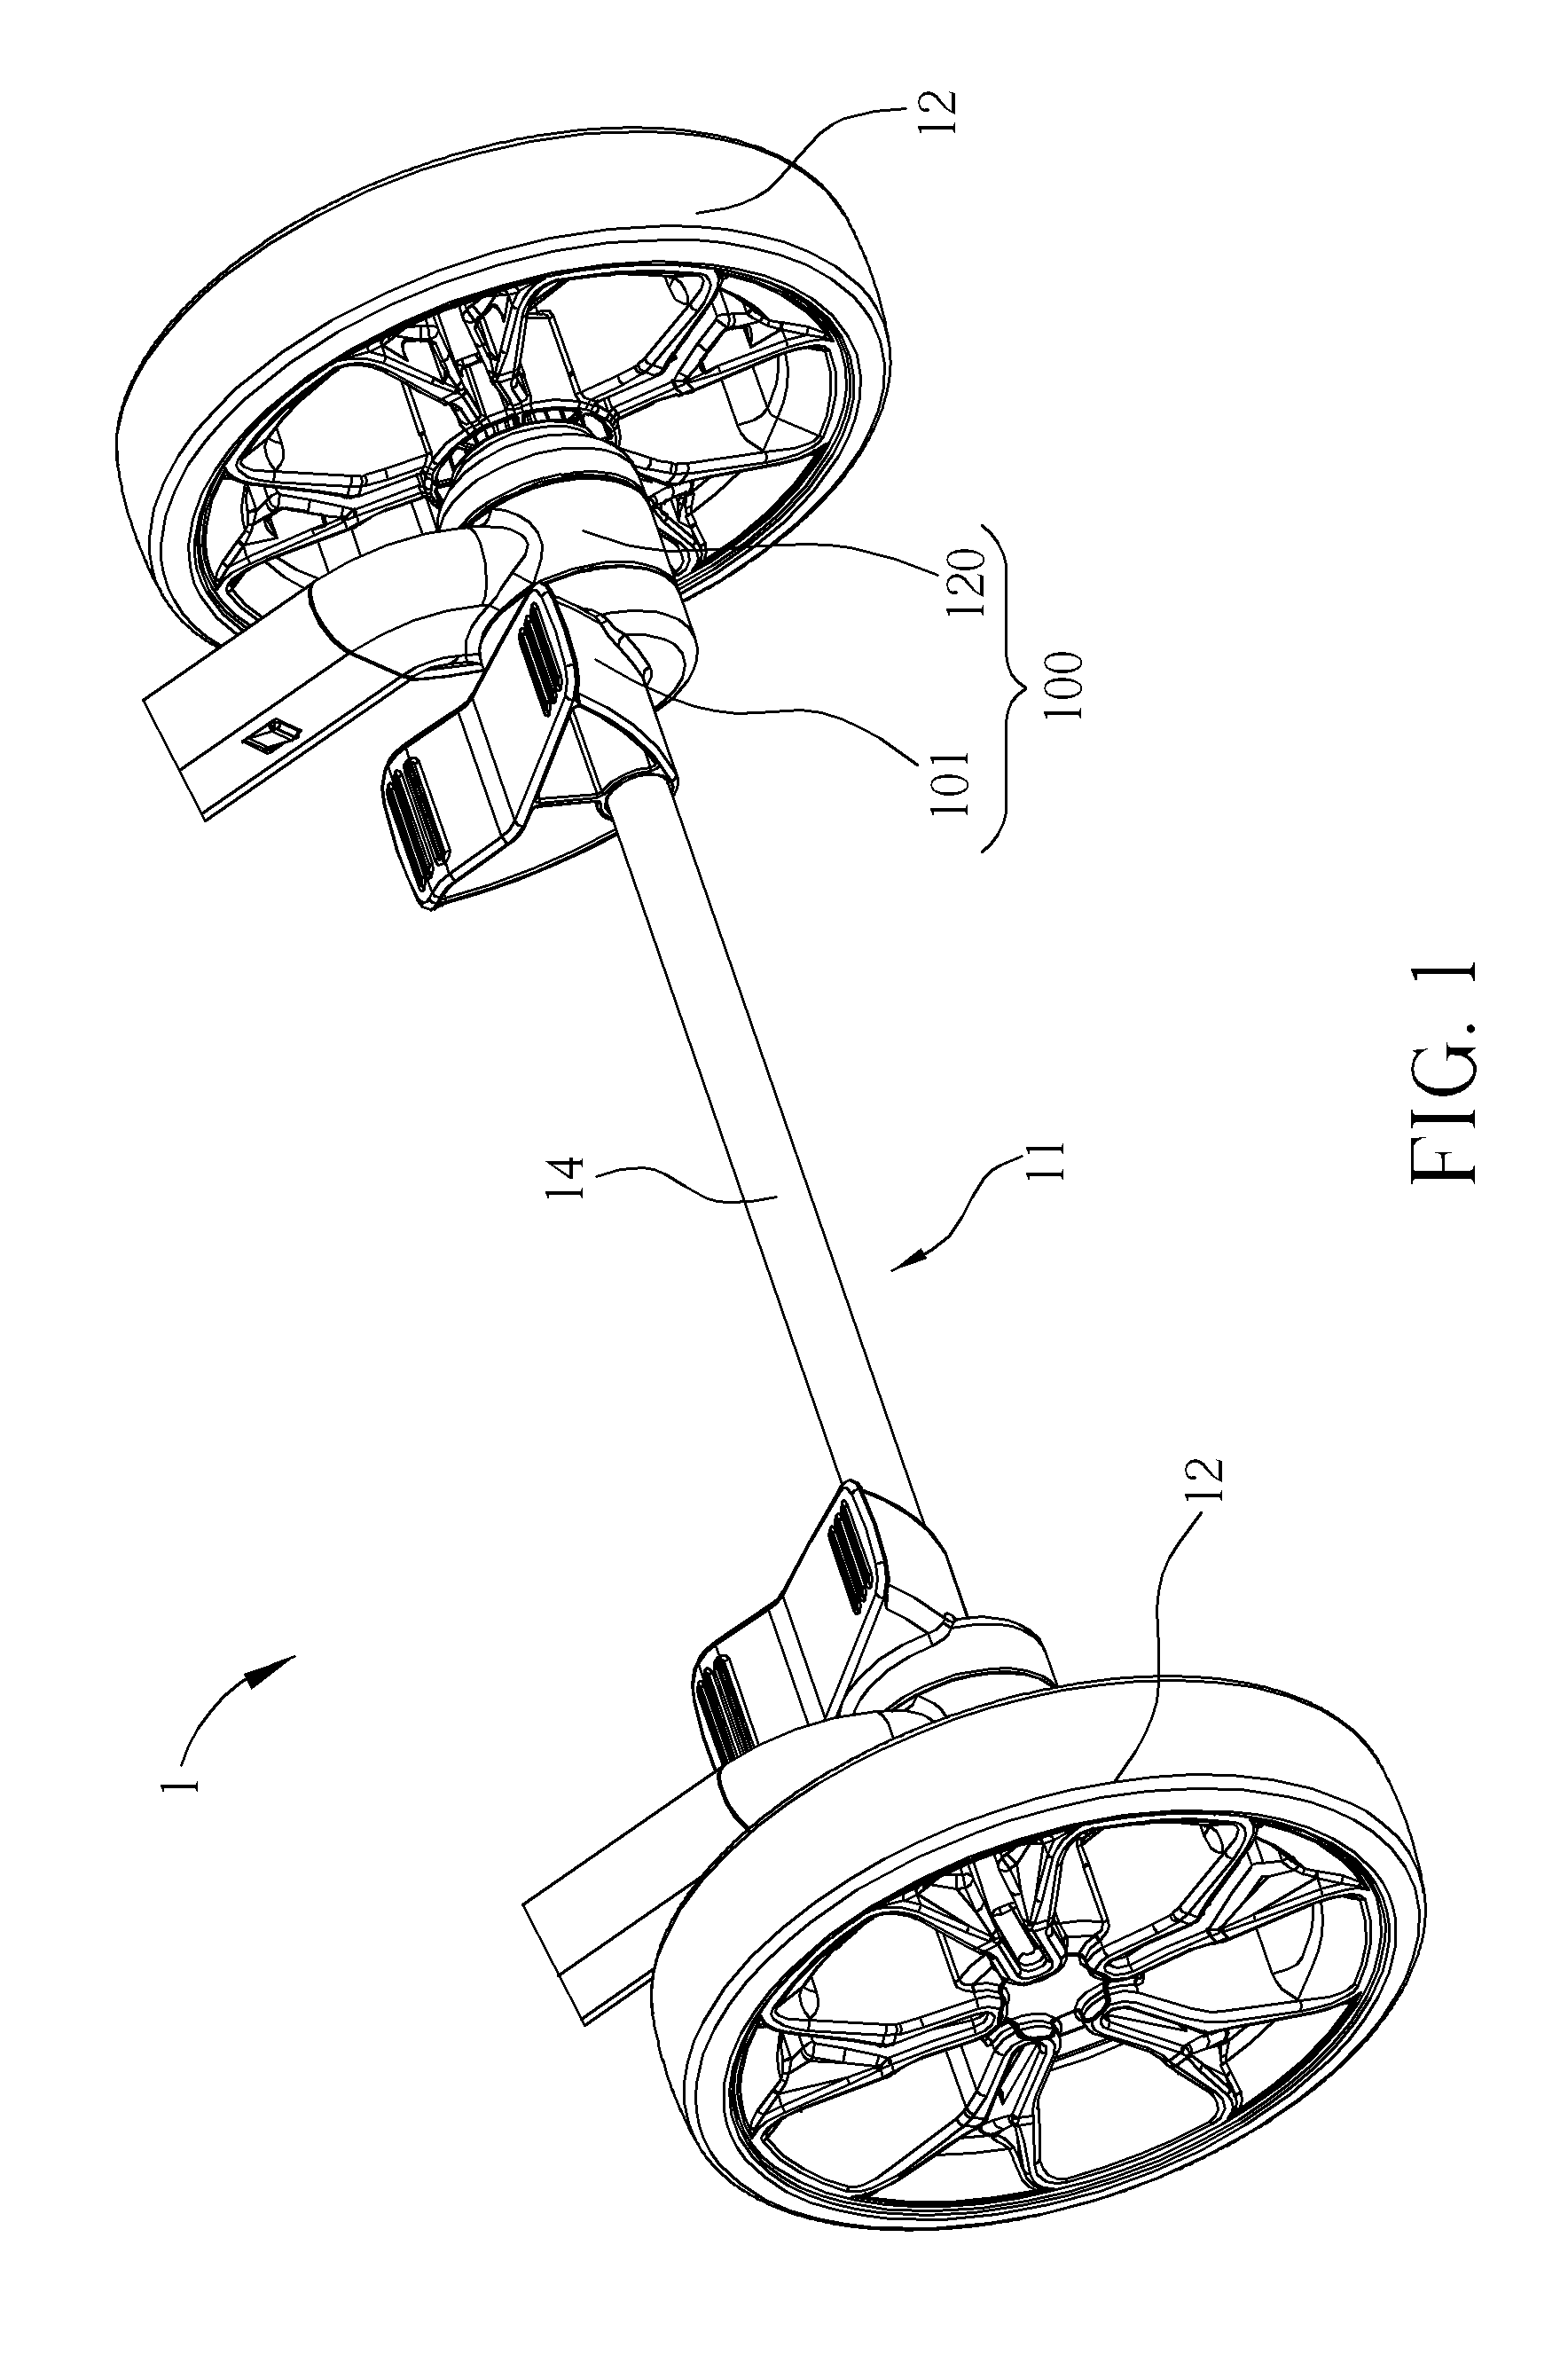 Stroller and brake mechanism thereof